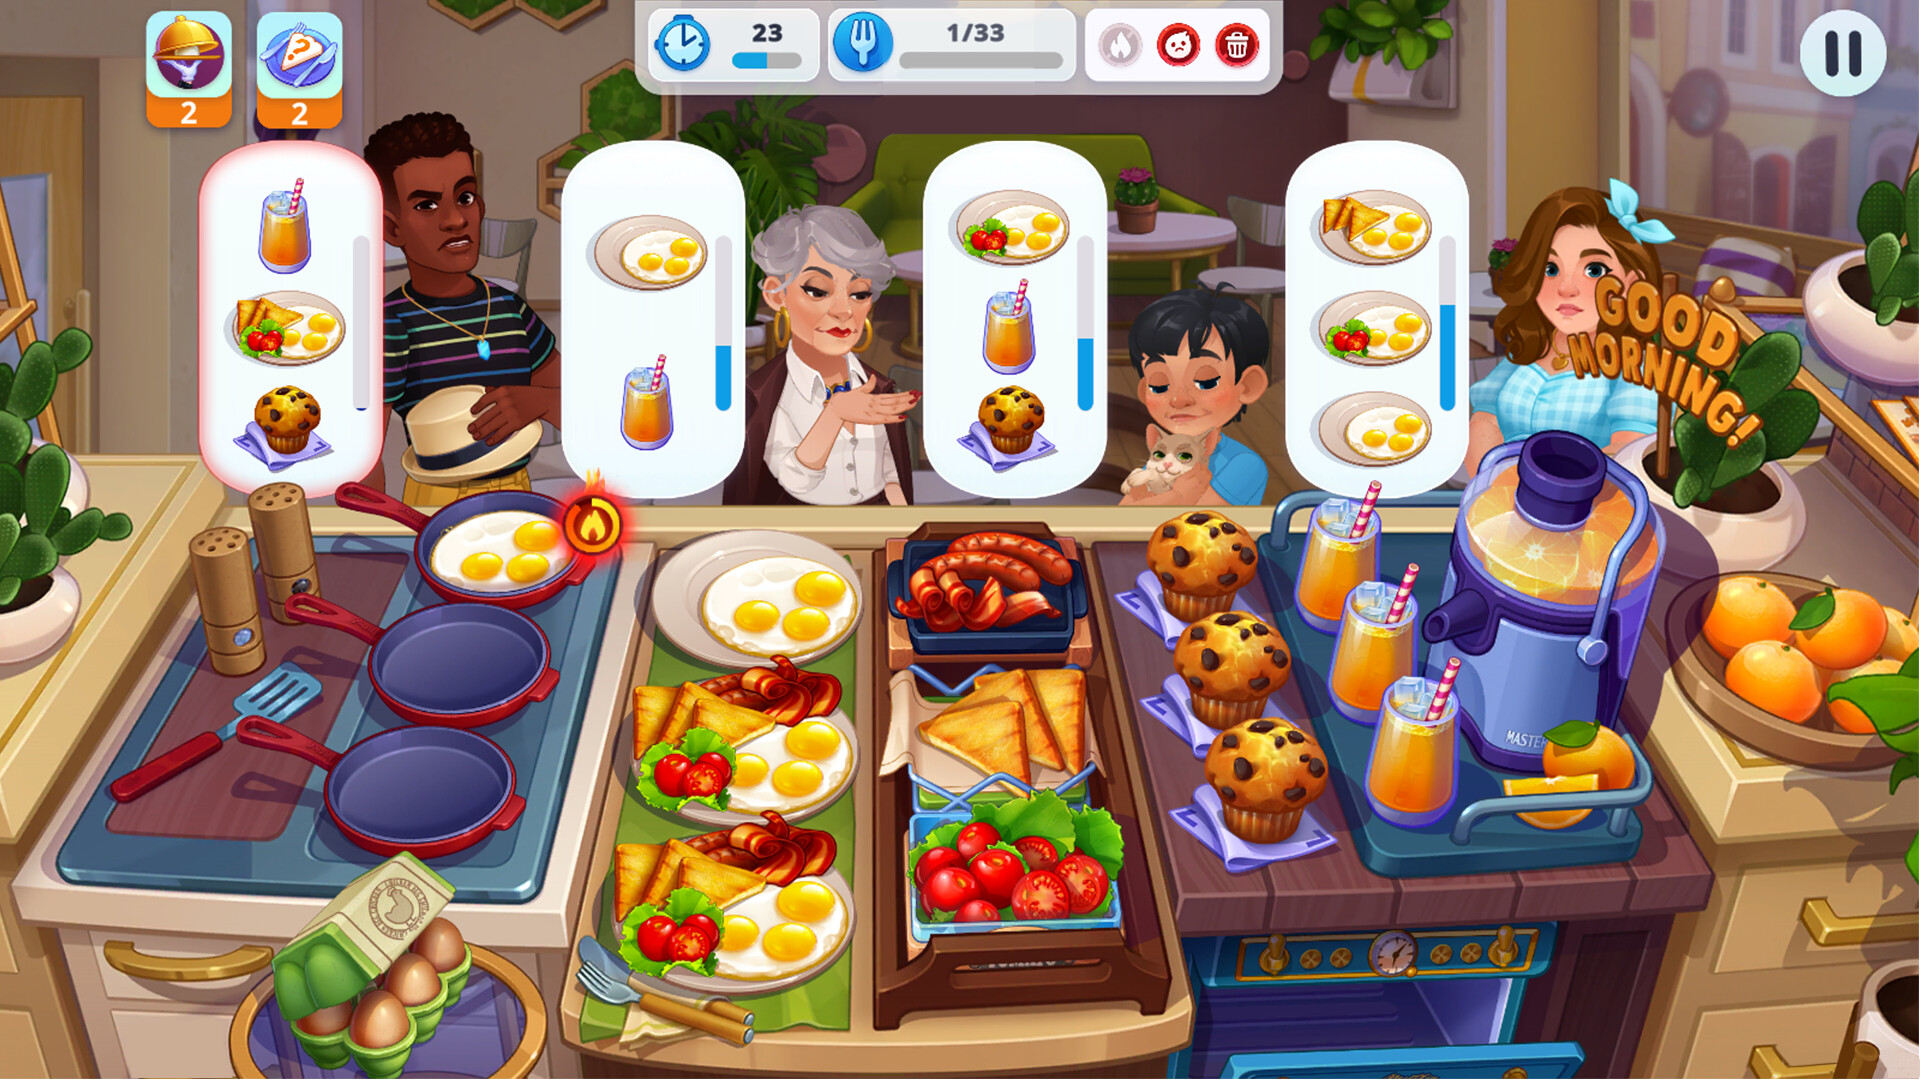 Cooking Live - Italian Kitchen Simulator Free Download for PC